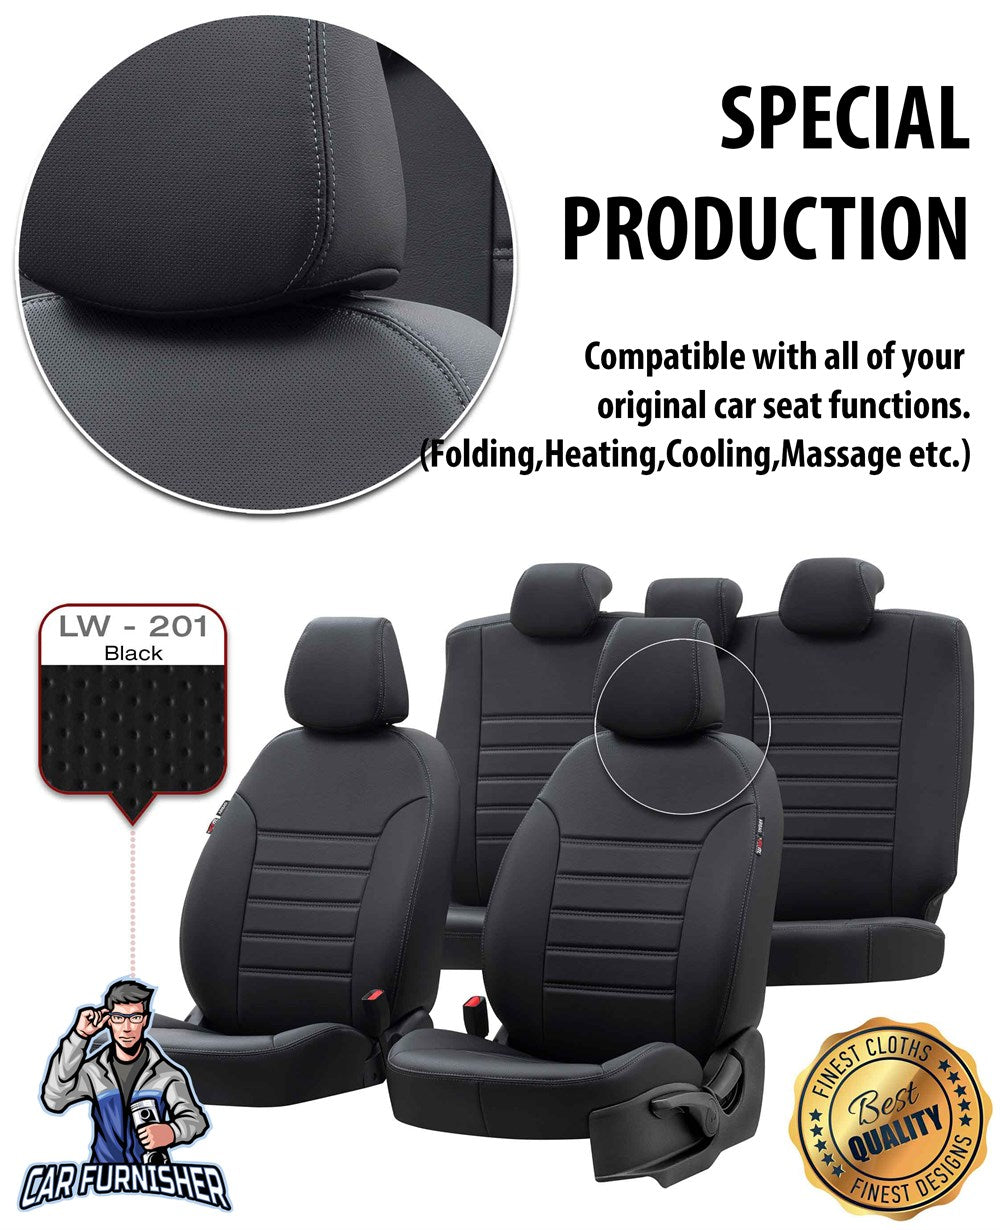 VW Beetle Car Seat Cover 2011-2017 A5 Istanbul Design Black Leather & Fabric